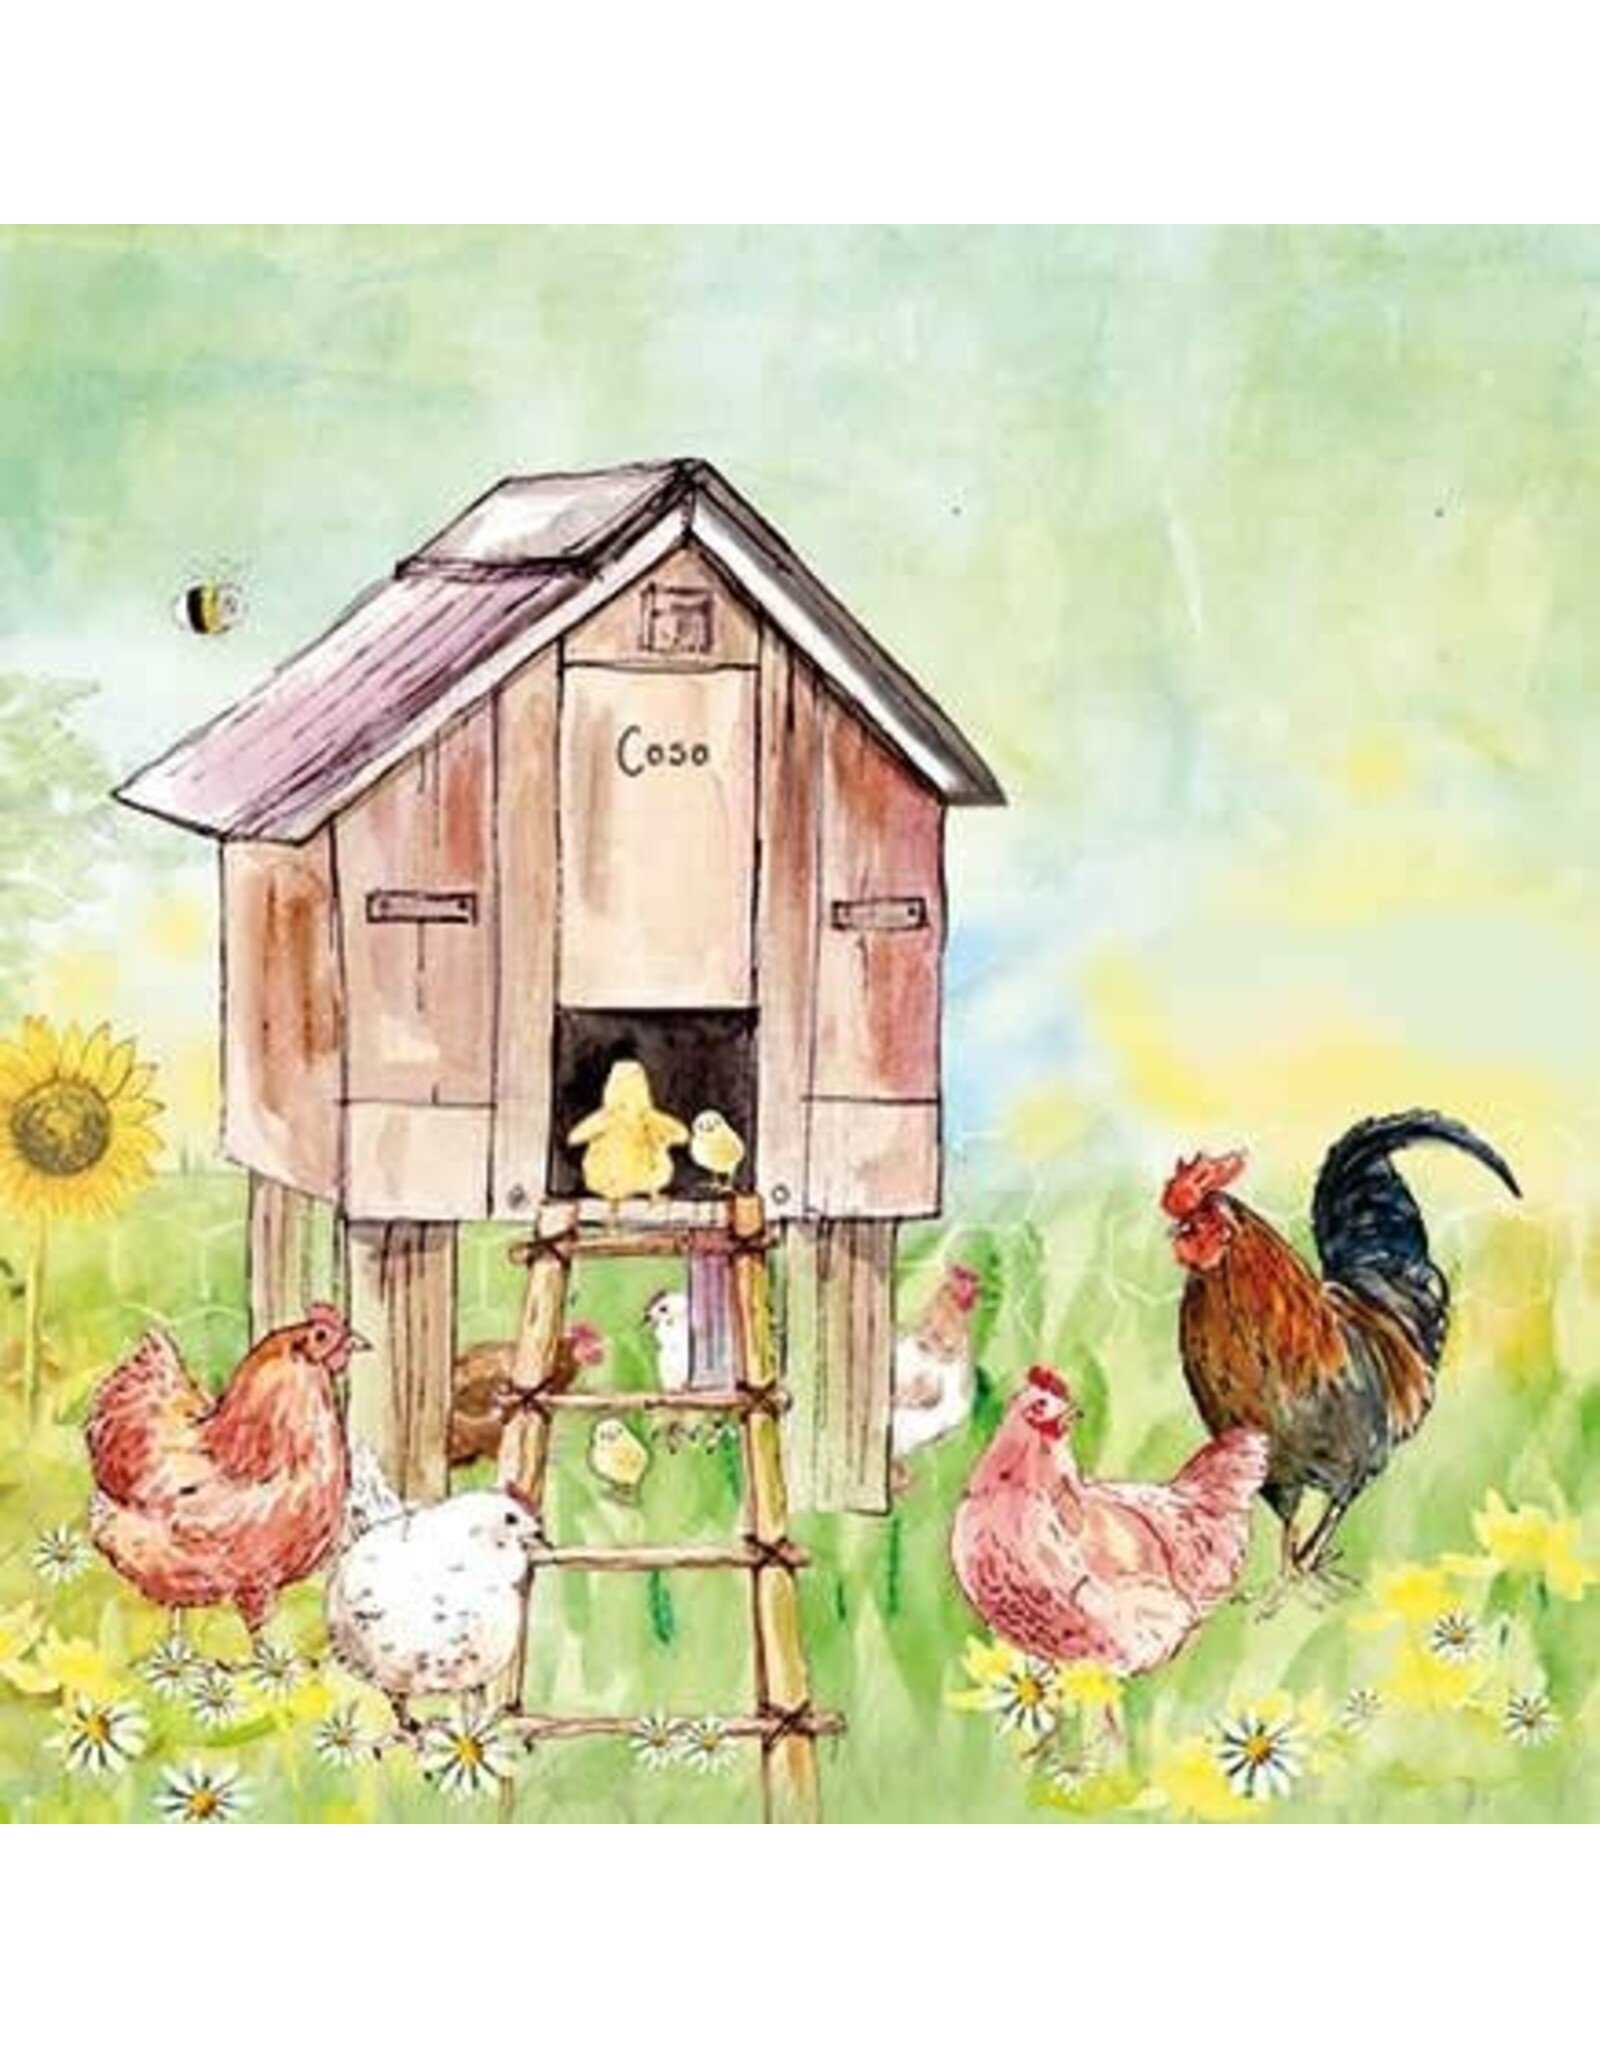 Animal Friends Animal Friends Card "Chickens"